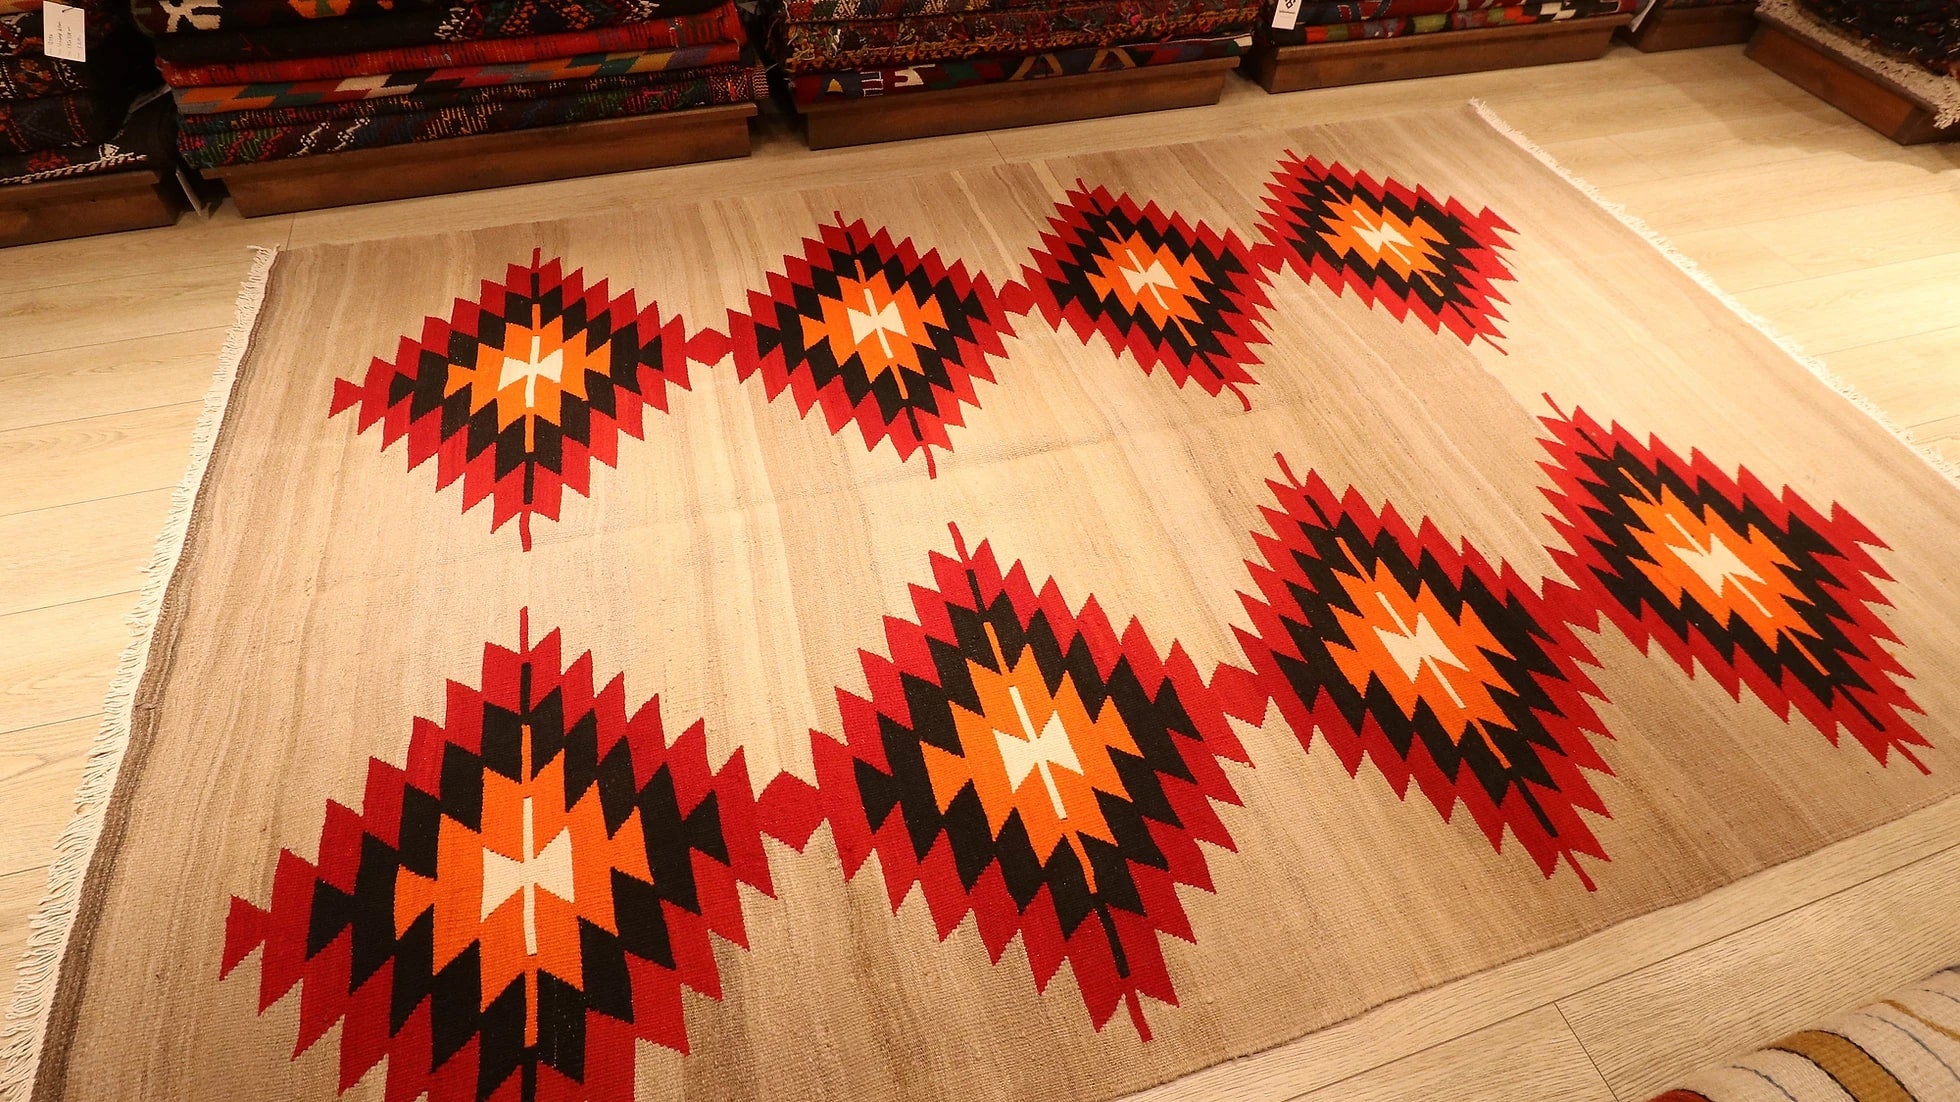 Handwoven Neutral Tribal Turkish Kilim Rug with red and orange lozenge patterns in beige